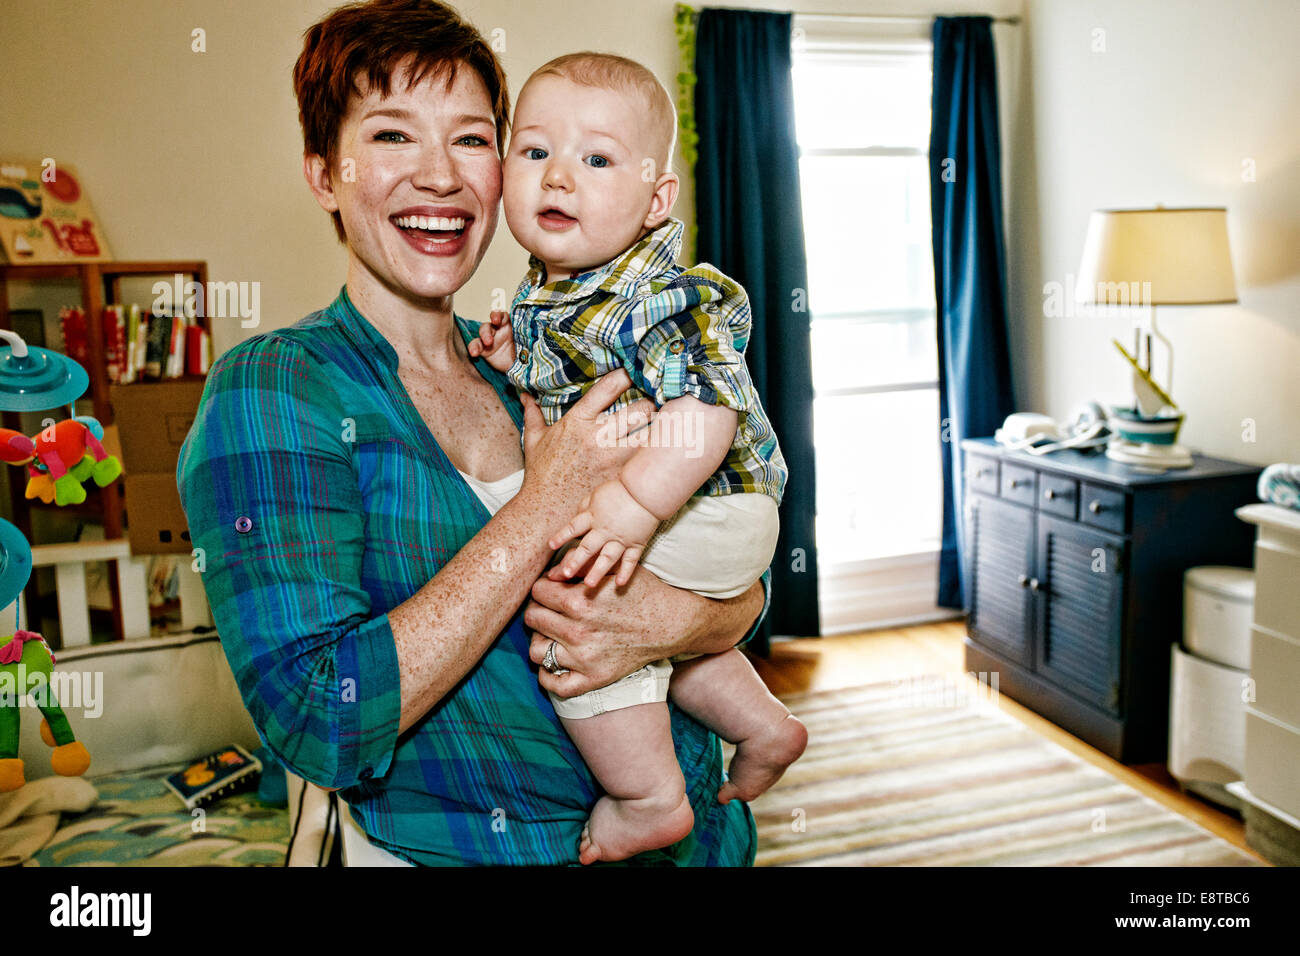 Caucasian mother holding baby in bedroom Stock Photo